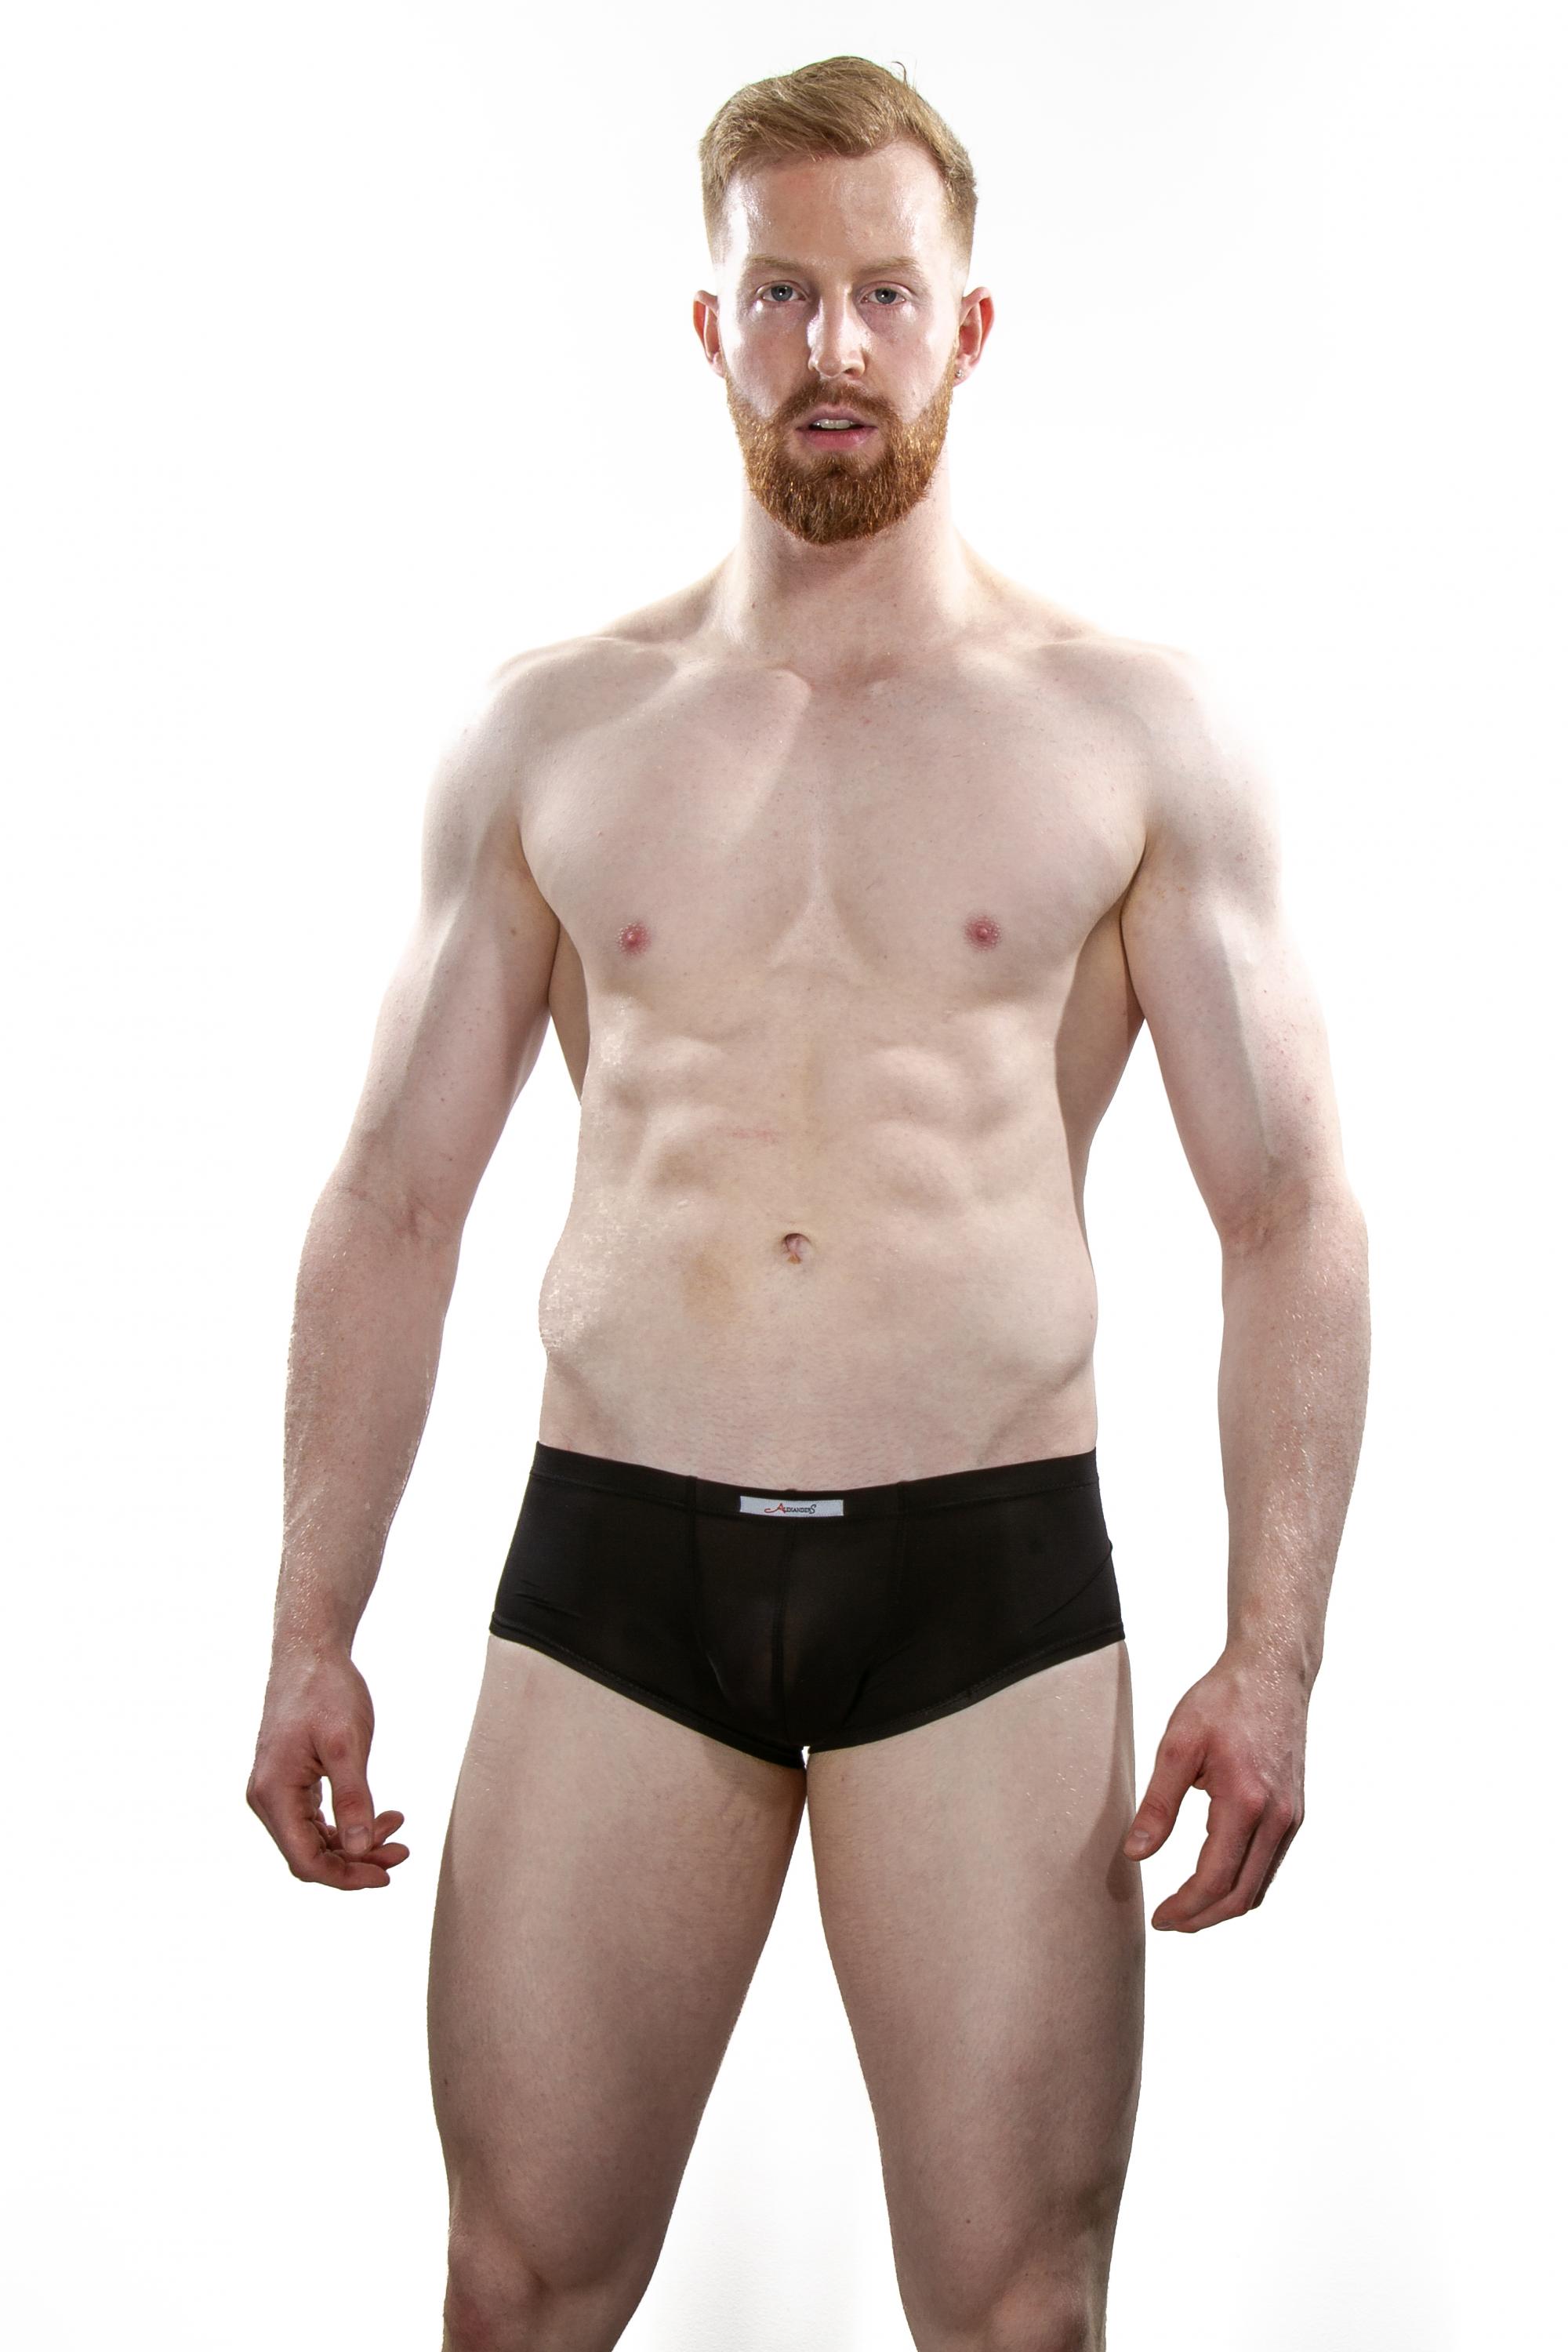 Celebrate your masculine physique with this defining microfiber brief by AlexanderS. Made from a barley there sheer fabric and contoured to hug your body.